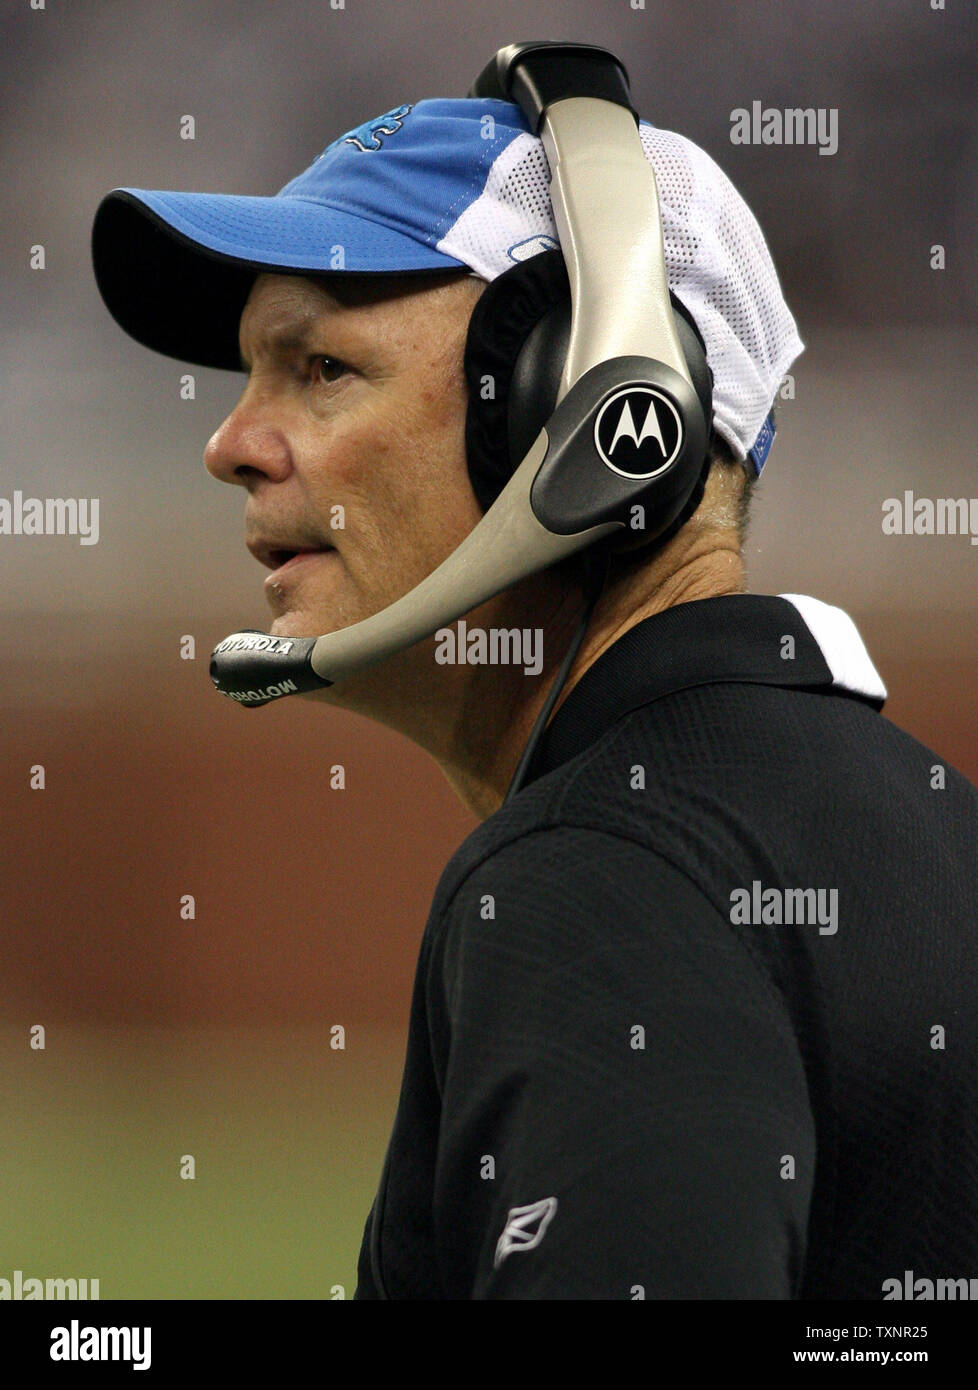 Detroit Lions coach Rod Marinelli watches the game during the closing minutes against the Green Bay Packers at Ford Field in Detroit on September 24, 2006.  The Packers defeated the Lions 31-24.  (UPI Photo/Scott R. Galvin) Stock Photo